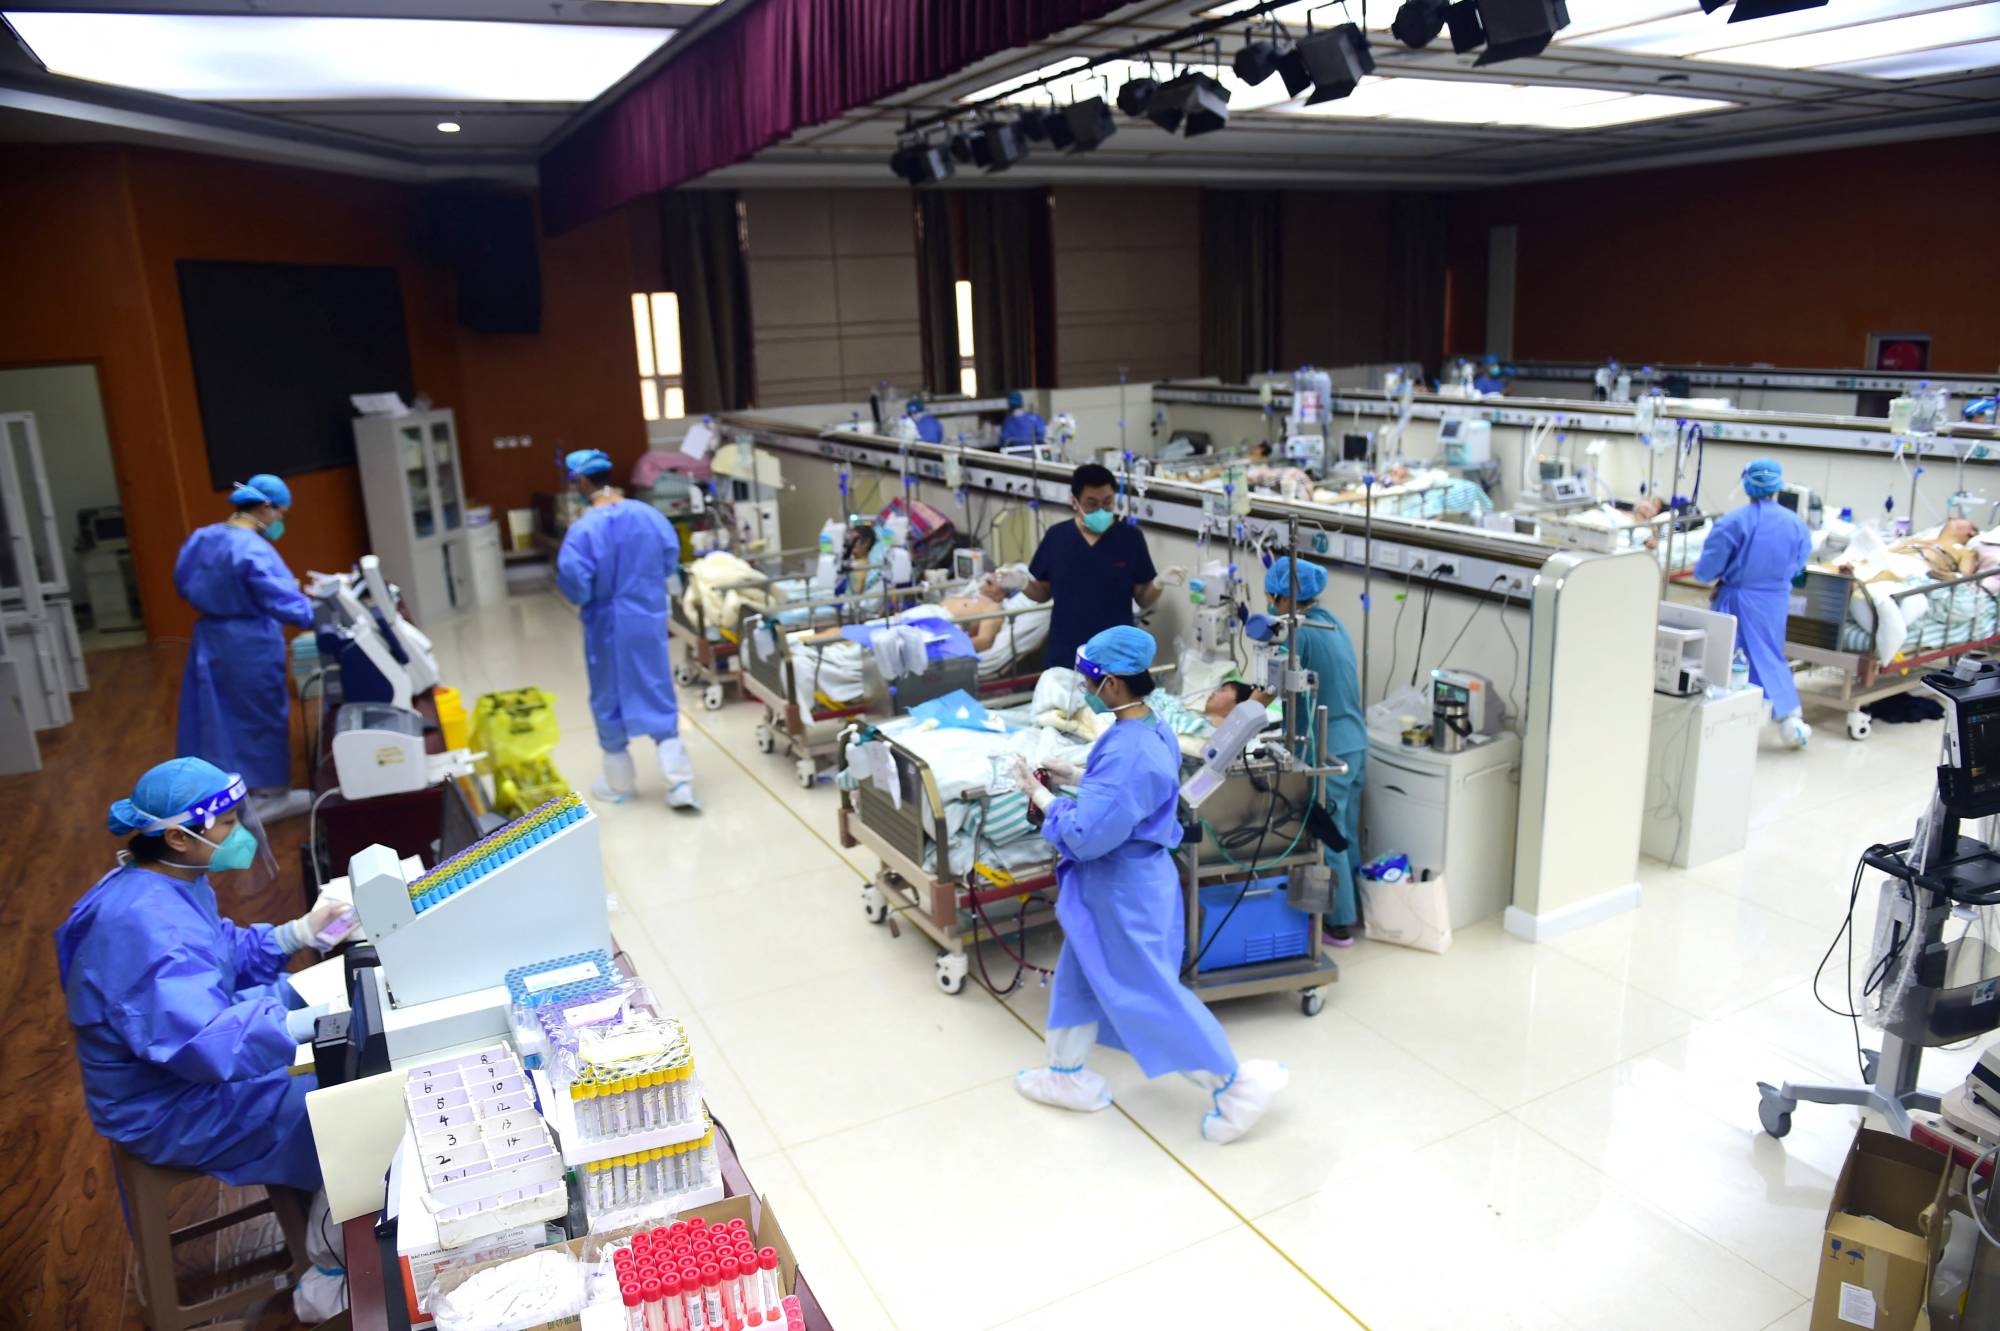 Medical workers attend to COVID-19 patients at an intensive care unit set up in a conference room at a hospital in Cangzhou, China, on Wednesday. | CHINA DAILY / VIA REUTERS